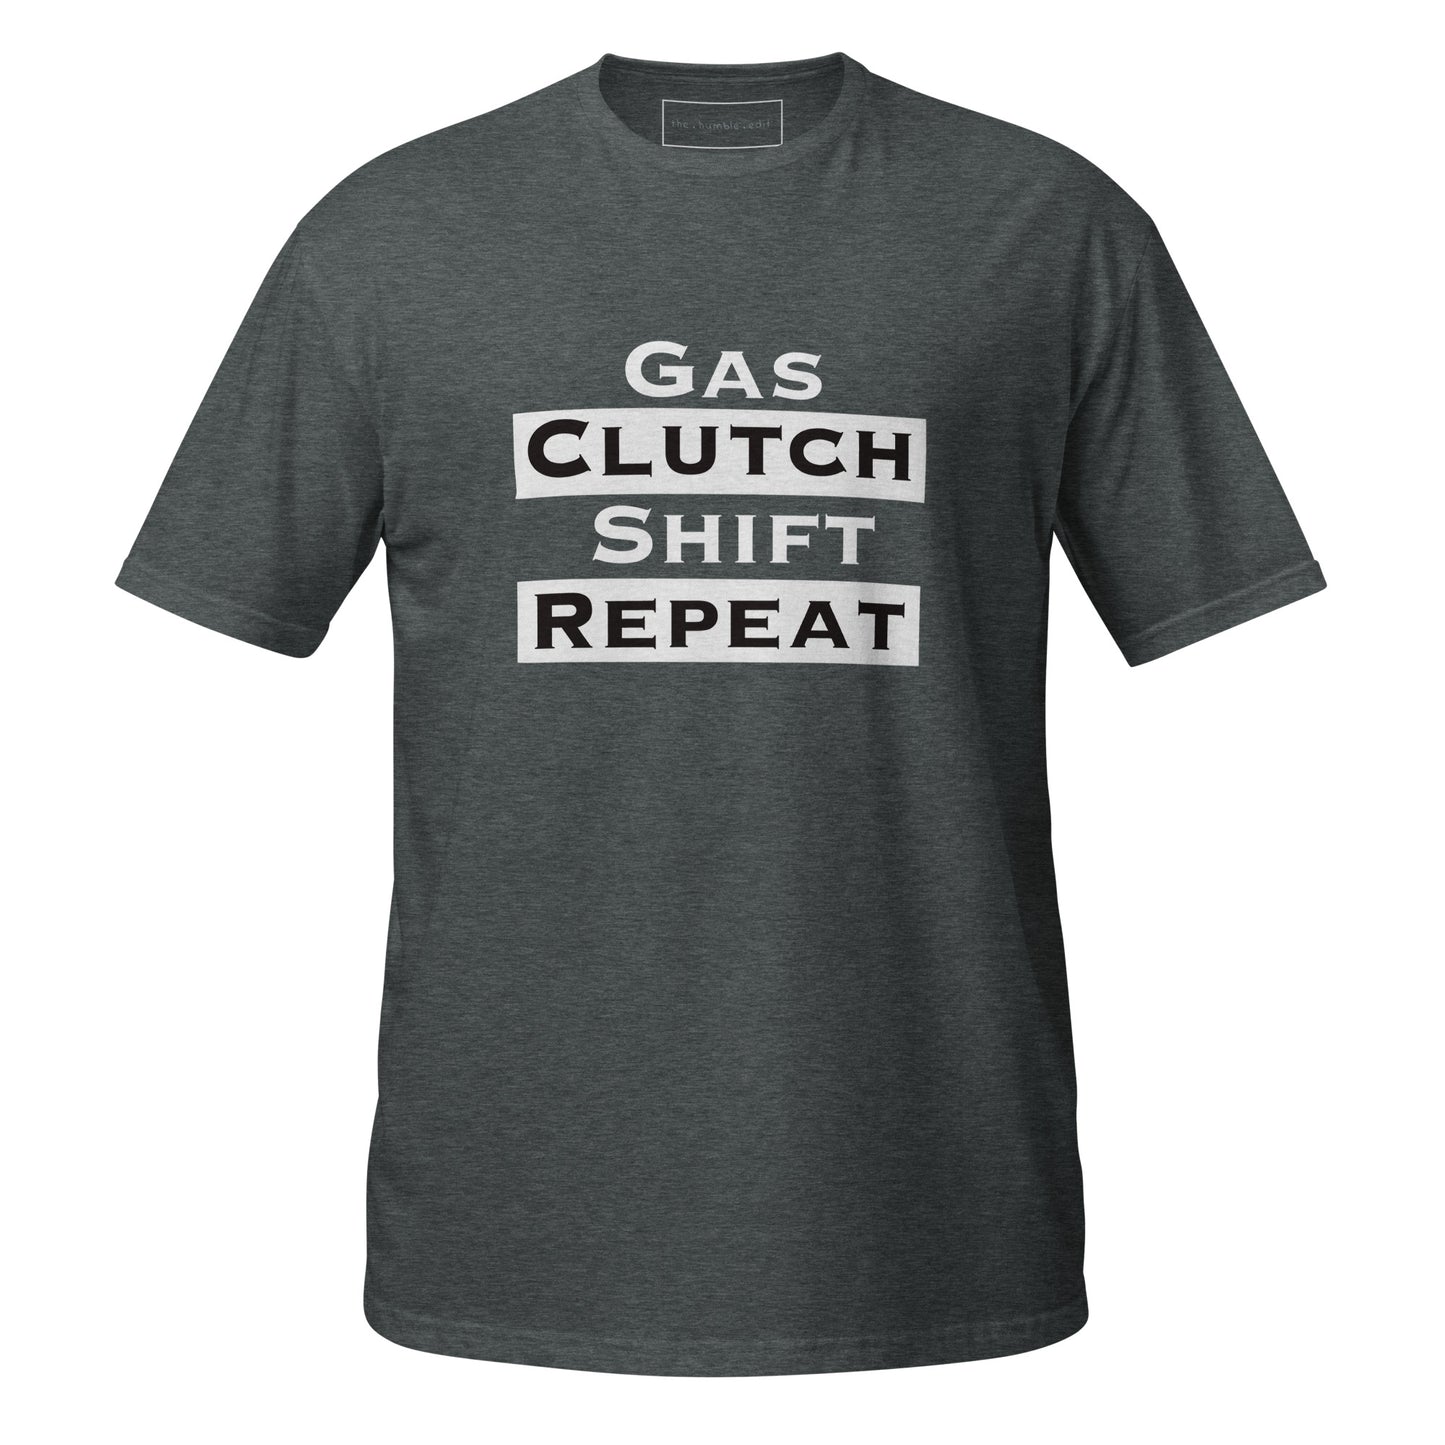 Gas, Clutch, Shift & Repeat - Unisex SoftStyle T-Shirt